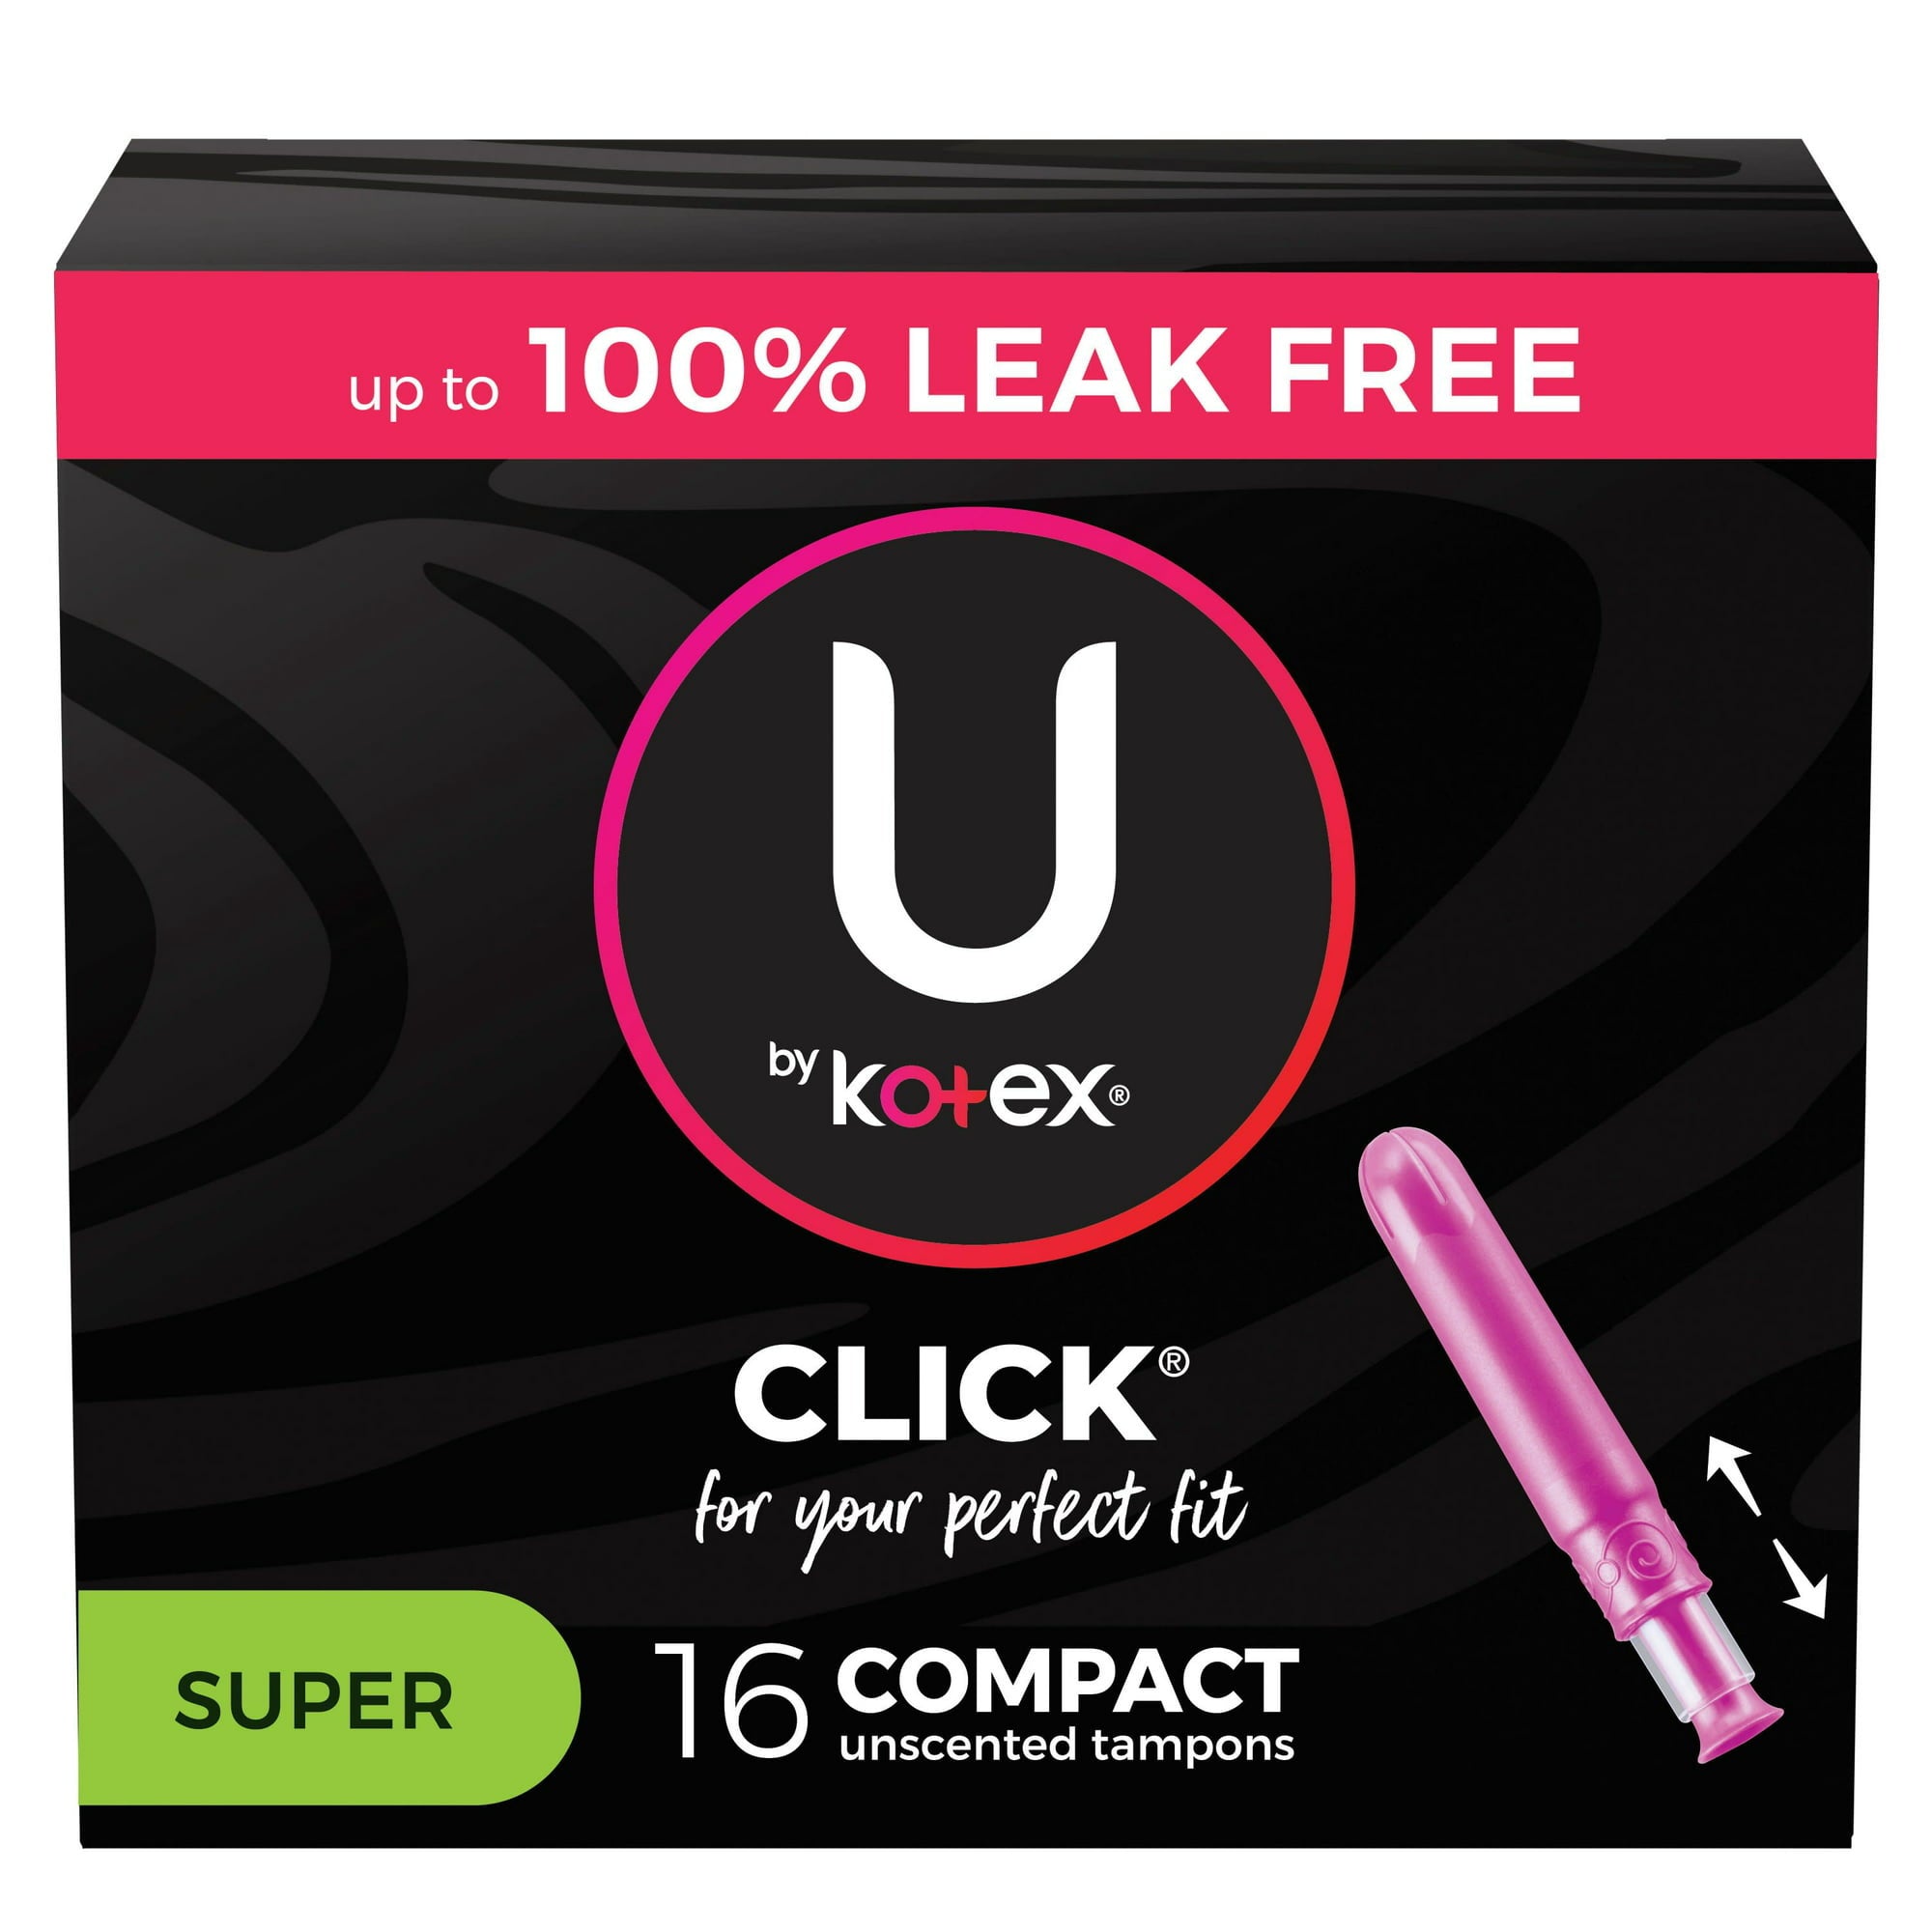 Tampons Super - 16 compact unscented tampons